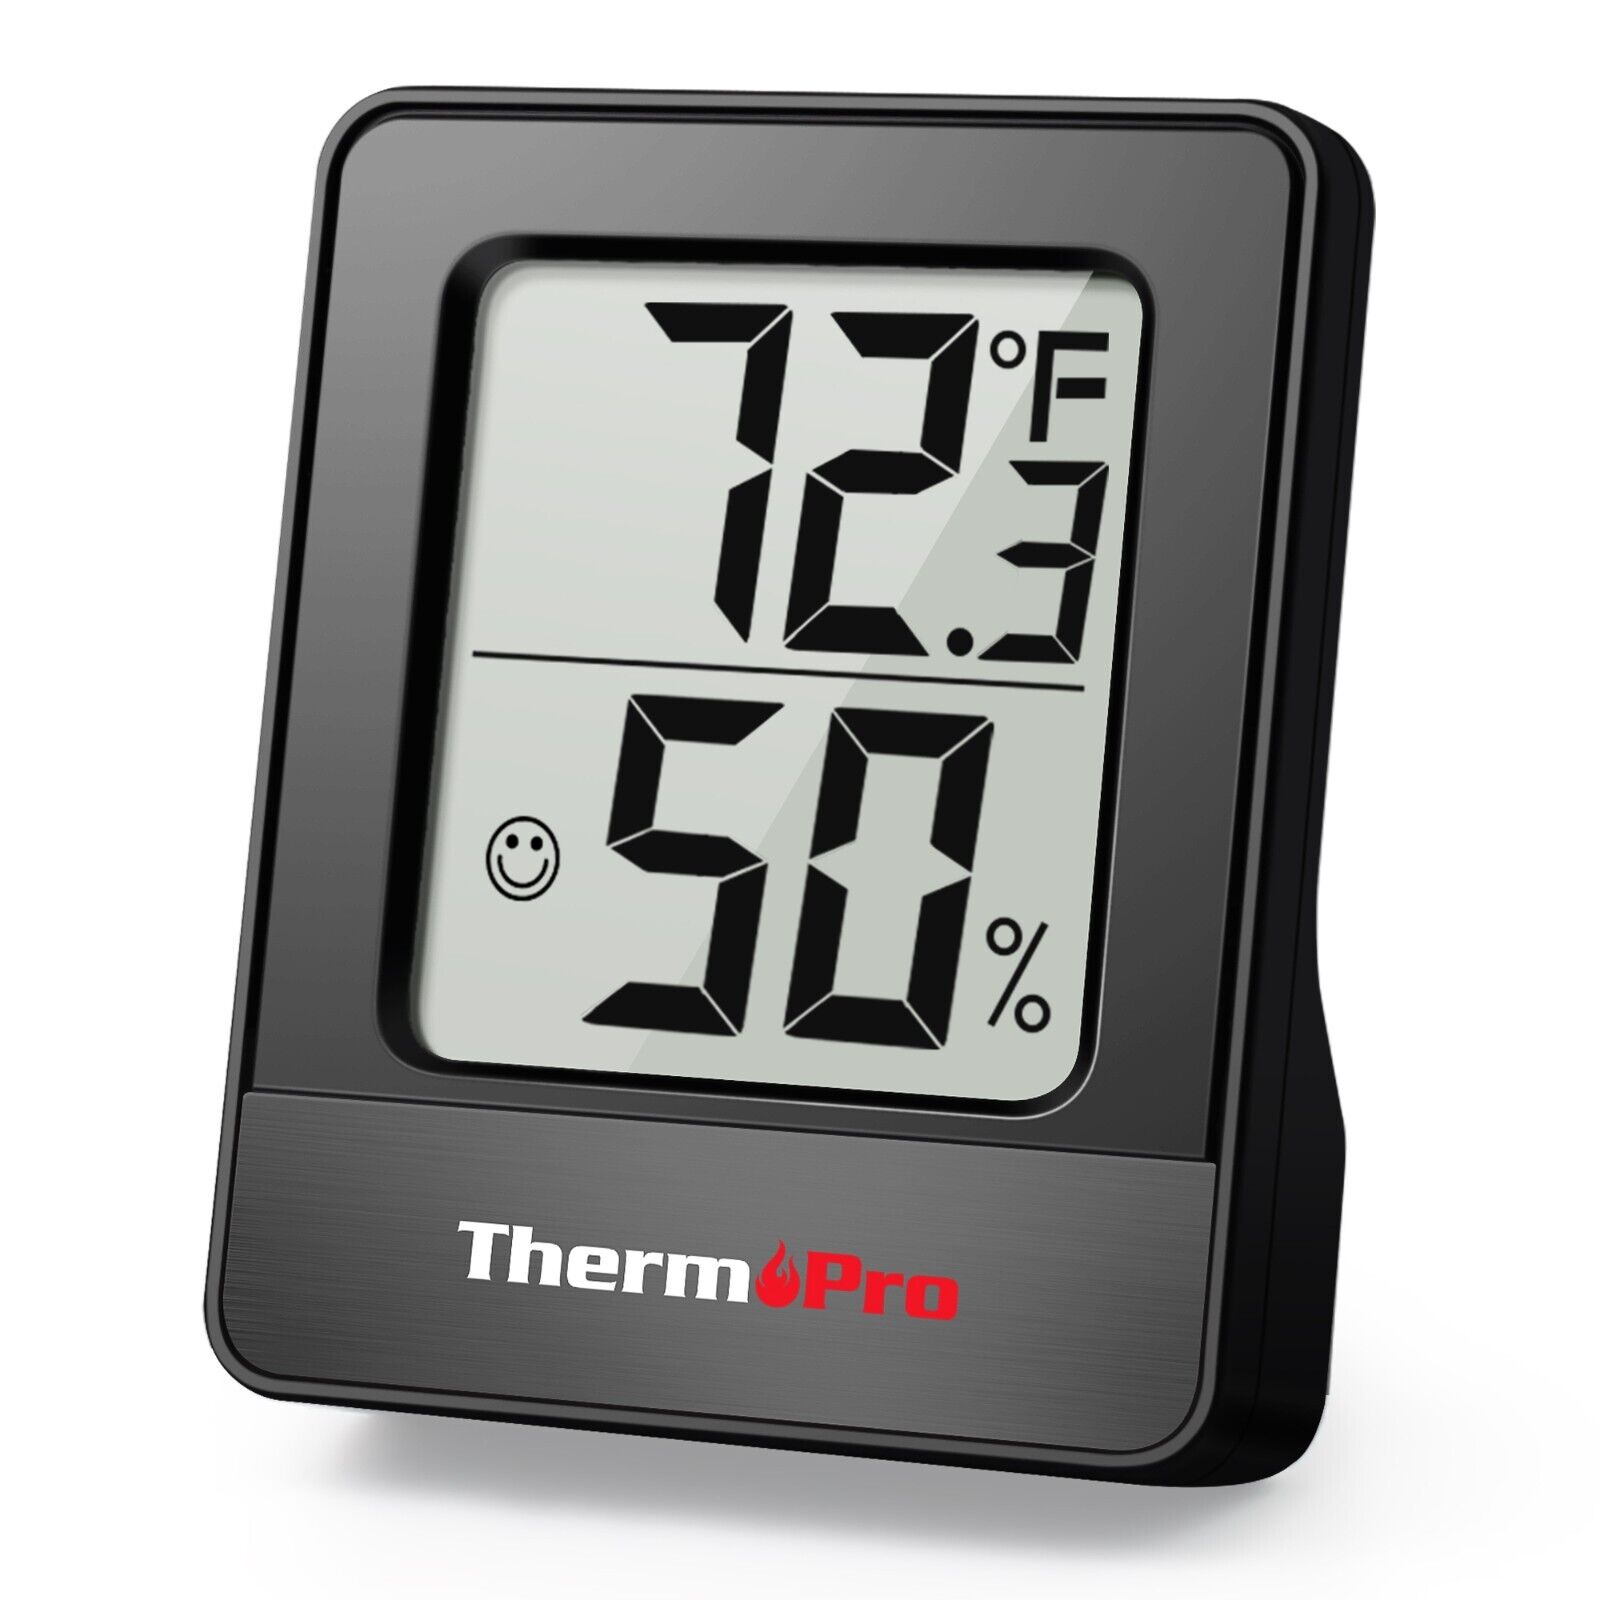 ThermoPro Mini LCD Digital Indoor Hygrometer Room Thermometer Humidity Monitor